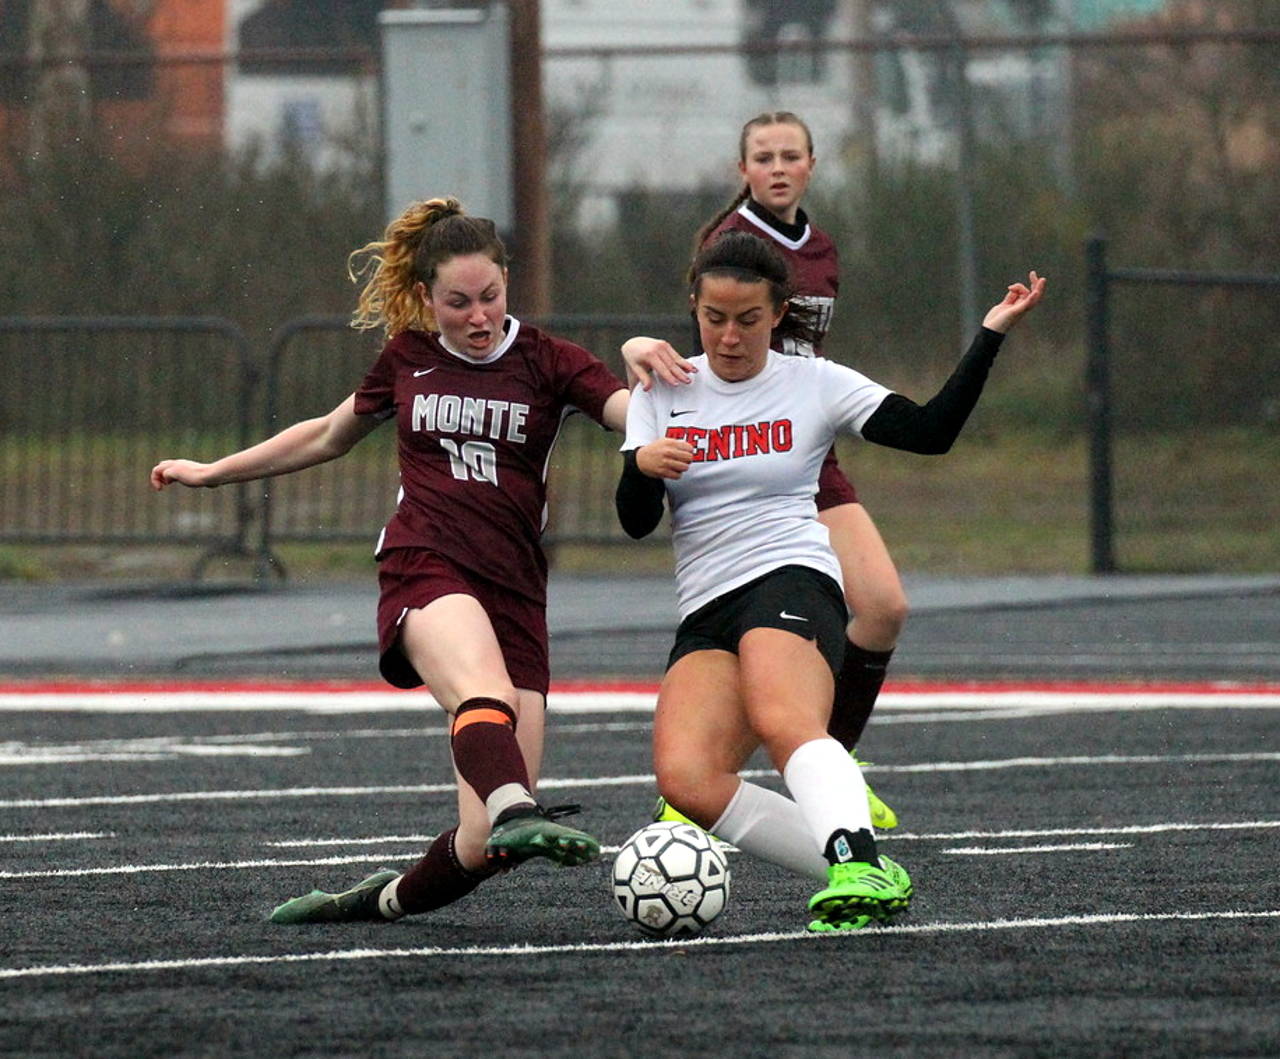 Montesano’s Brooke Streeter (10) contests Tenino’s Iris Campesino for possession during the 1A District IV championship game on Saturday in Tenino. (Photo by Shawn Donnelly)